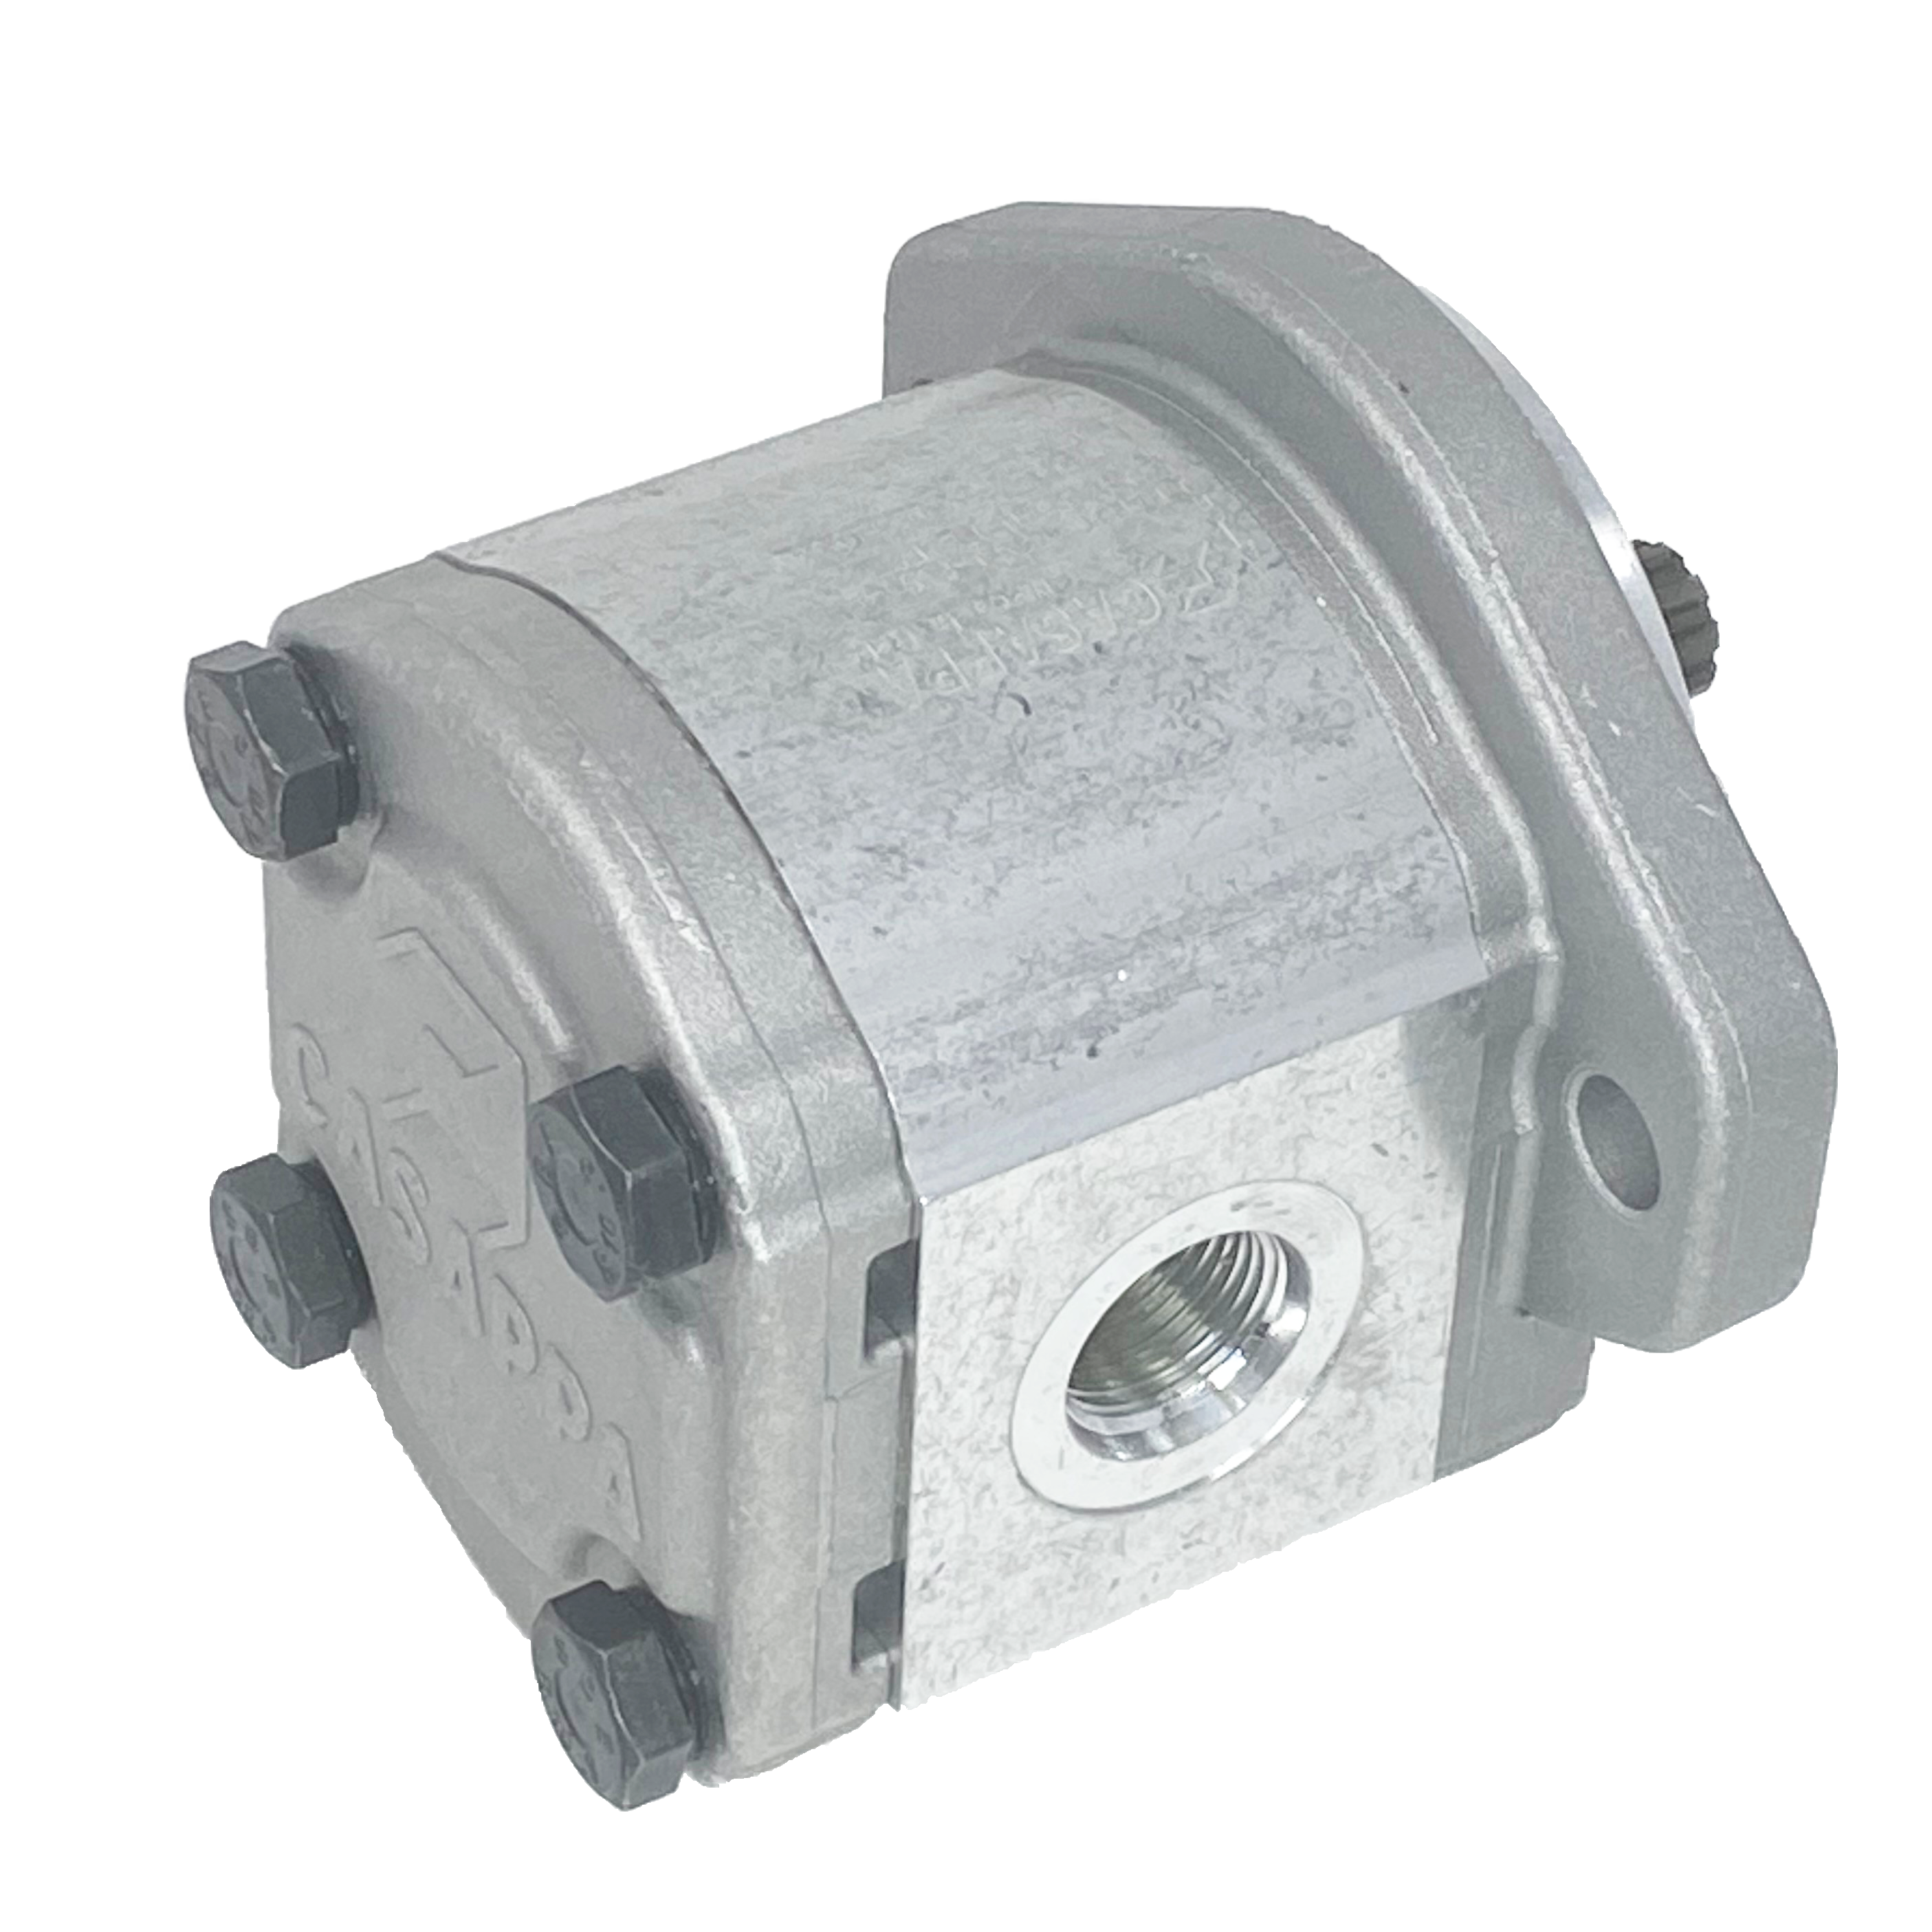 PLP20.4S0-31S1-LOF/OC-S7-N-EL-FS : Casappa Polaris Gear Pump, 4.95cc, 3625psi Rated, 4000RPM, CCW, 5/8" Keyed Shaft, SAE A 2-Bolt Flange, 1" #16 SAE Inlet, 0.625 (5/8") #10 SAE Outlet, Aluminum Body & Flange